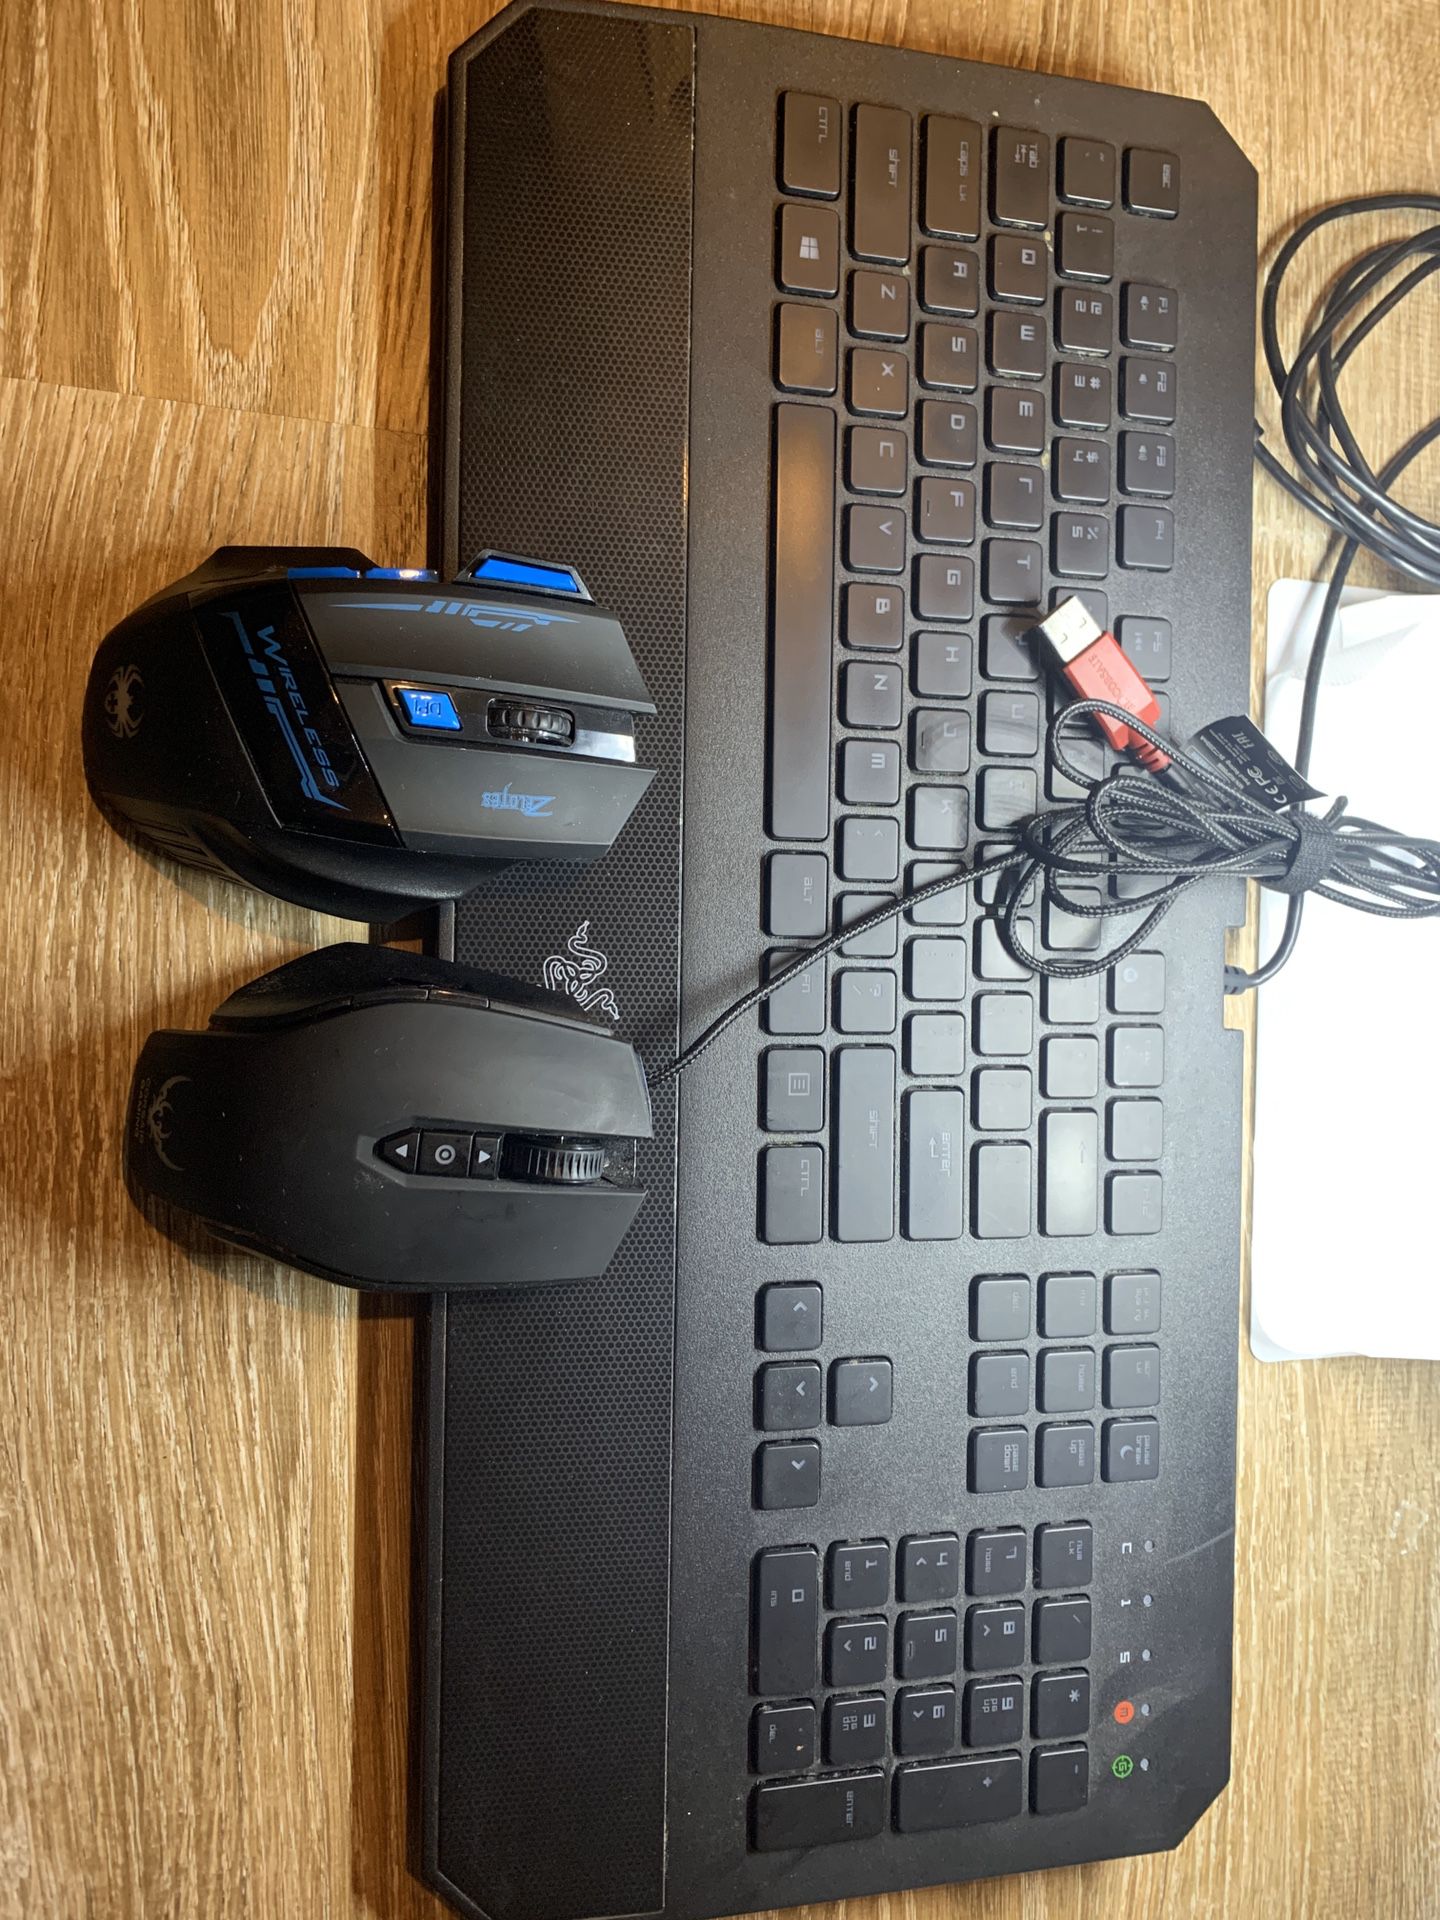 Keyboard and mouse gaming